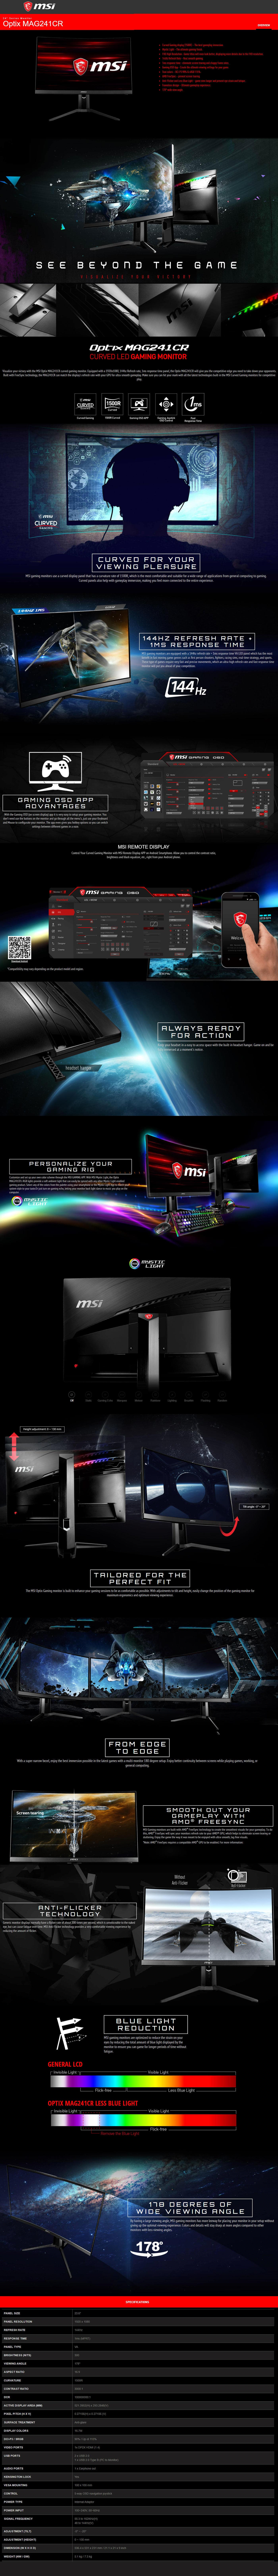 Buy Online MSI Optix MAG241CR 23.6inch Curved 144Hz 1ms Gaming Monitor